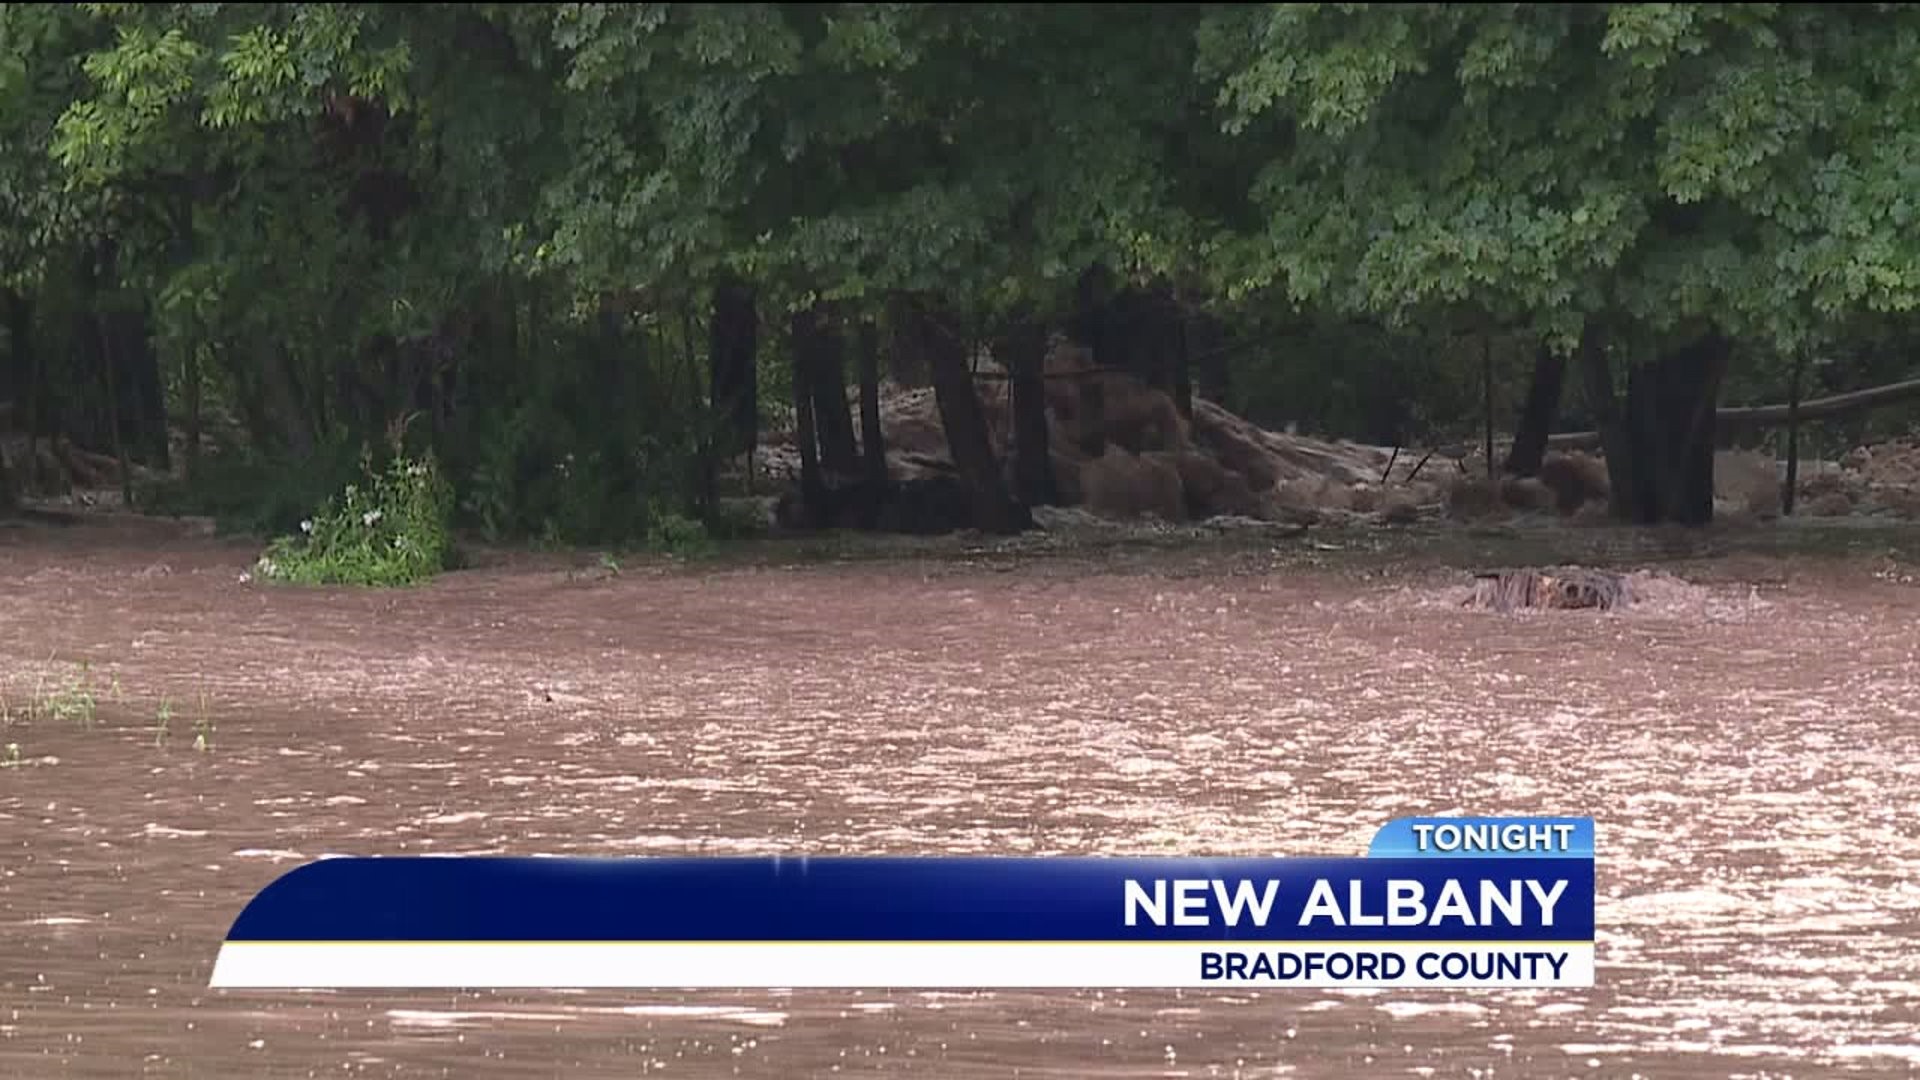 More Flooding in Bradford County